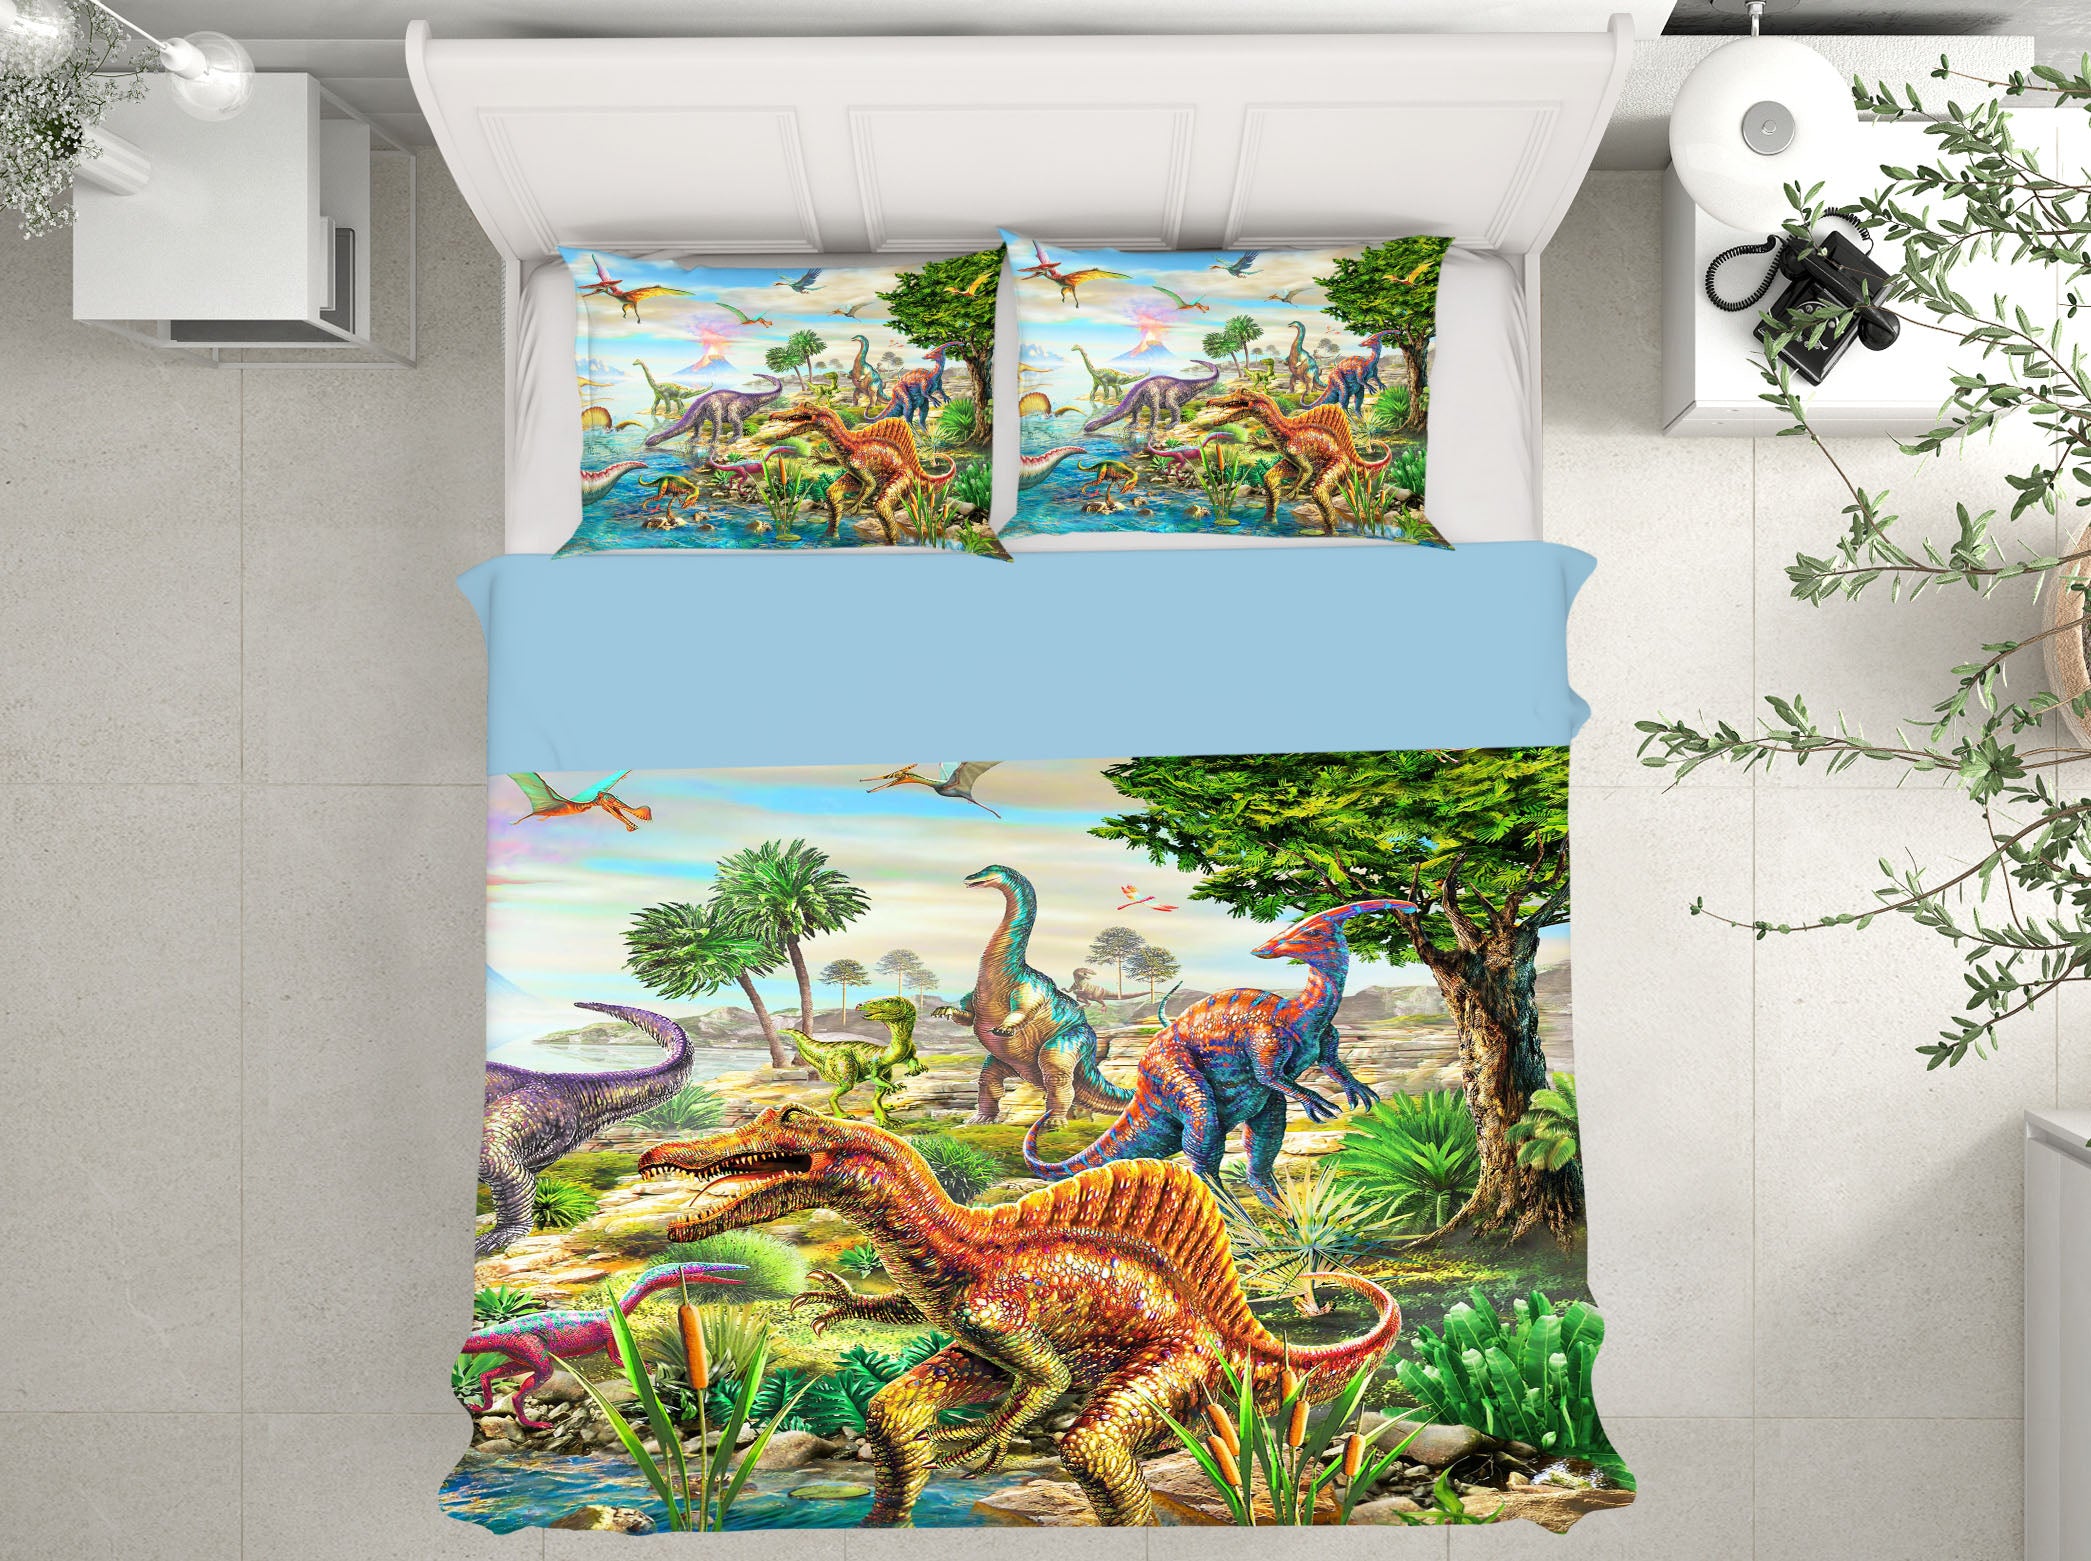 3D Dinosaur Forest 2124 Adrian Chesterman Bedding Bed Pillowcases Quilt